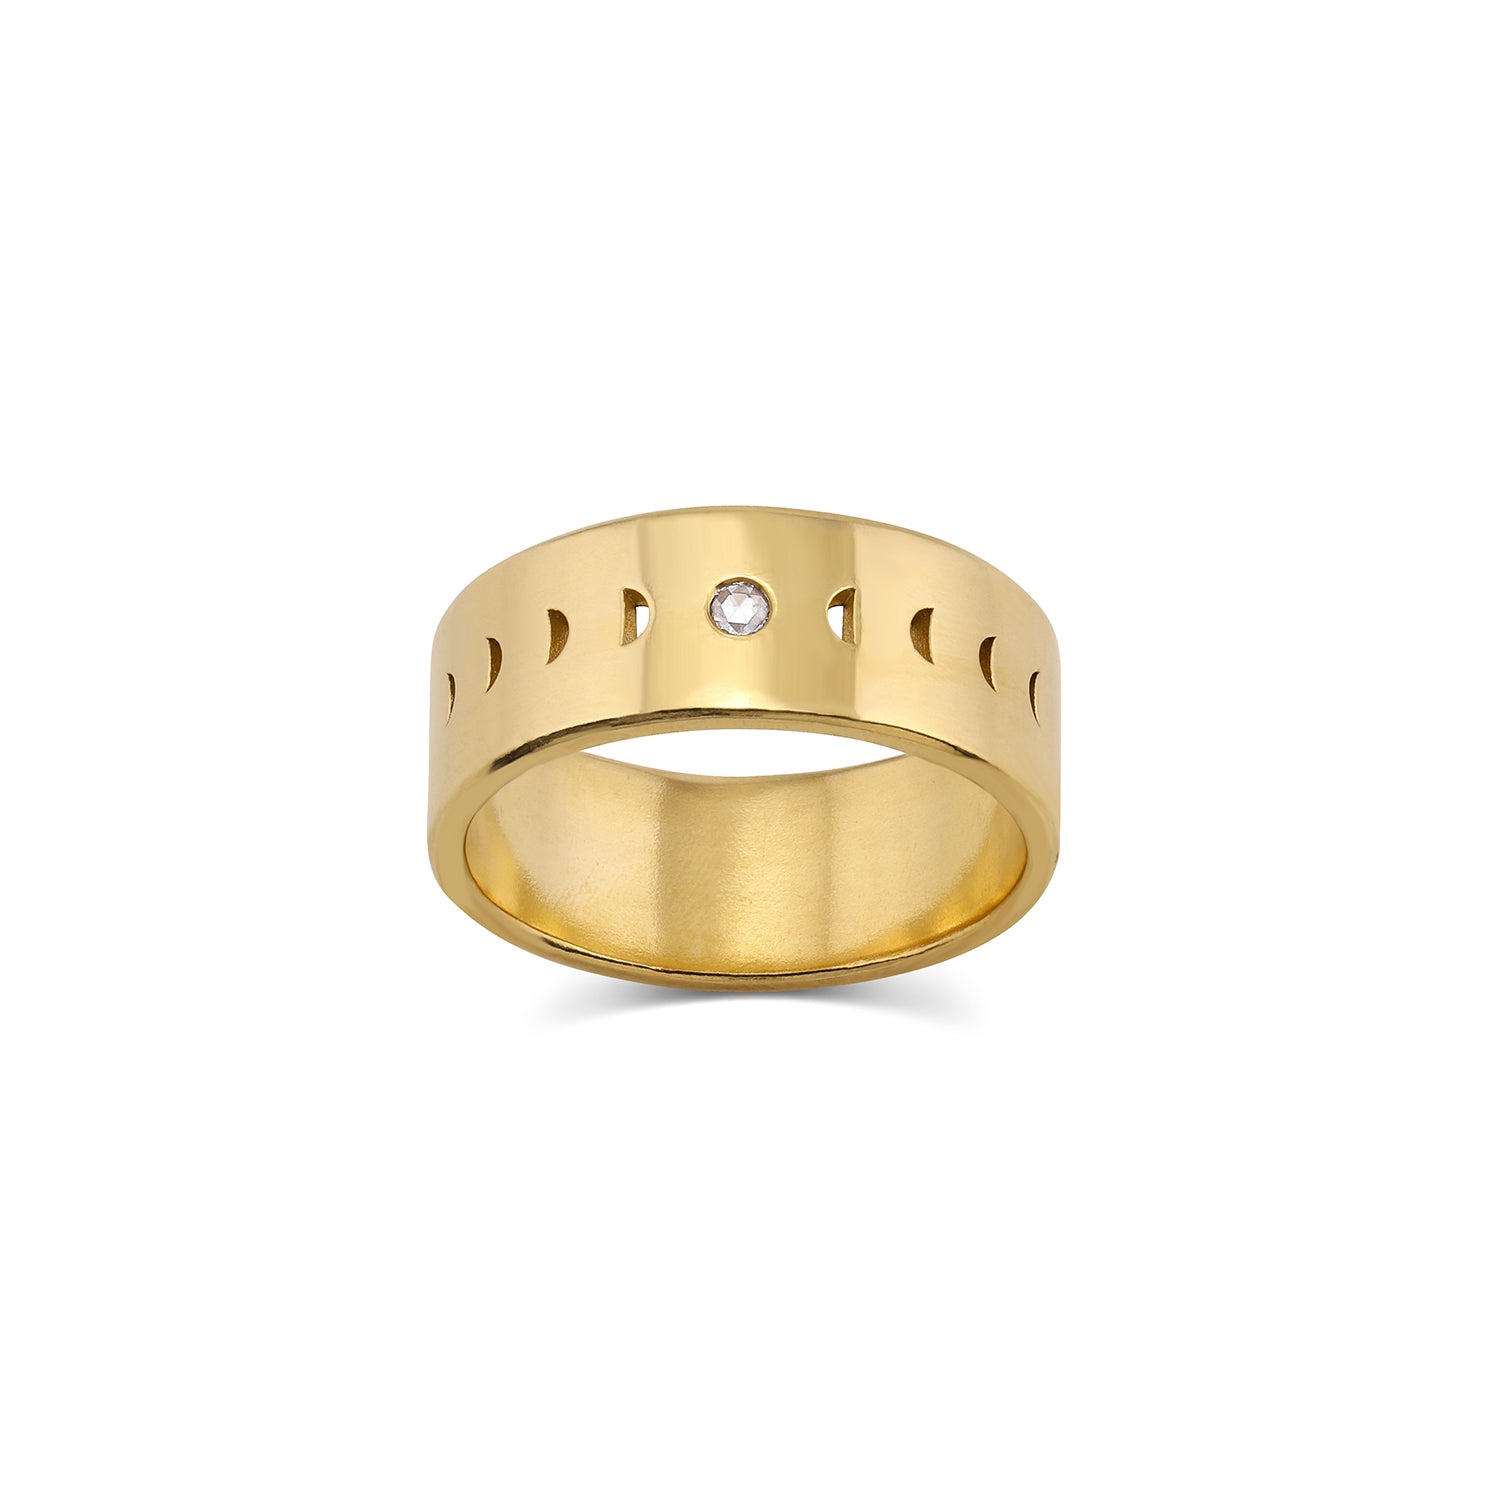 Moon Phase Rings moon phase rings > stacking rings > wedding bands > gender neutral bands > rose cut diamond ring > promise rings >lunar phase ring > moon ring > phases of the moon ring 14k yellow gold / 6 Eclipse Moon phase band | gender neutral wide band | white diamond